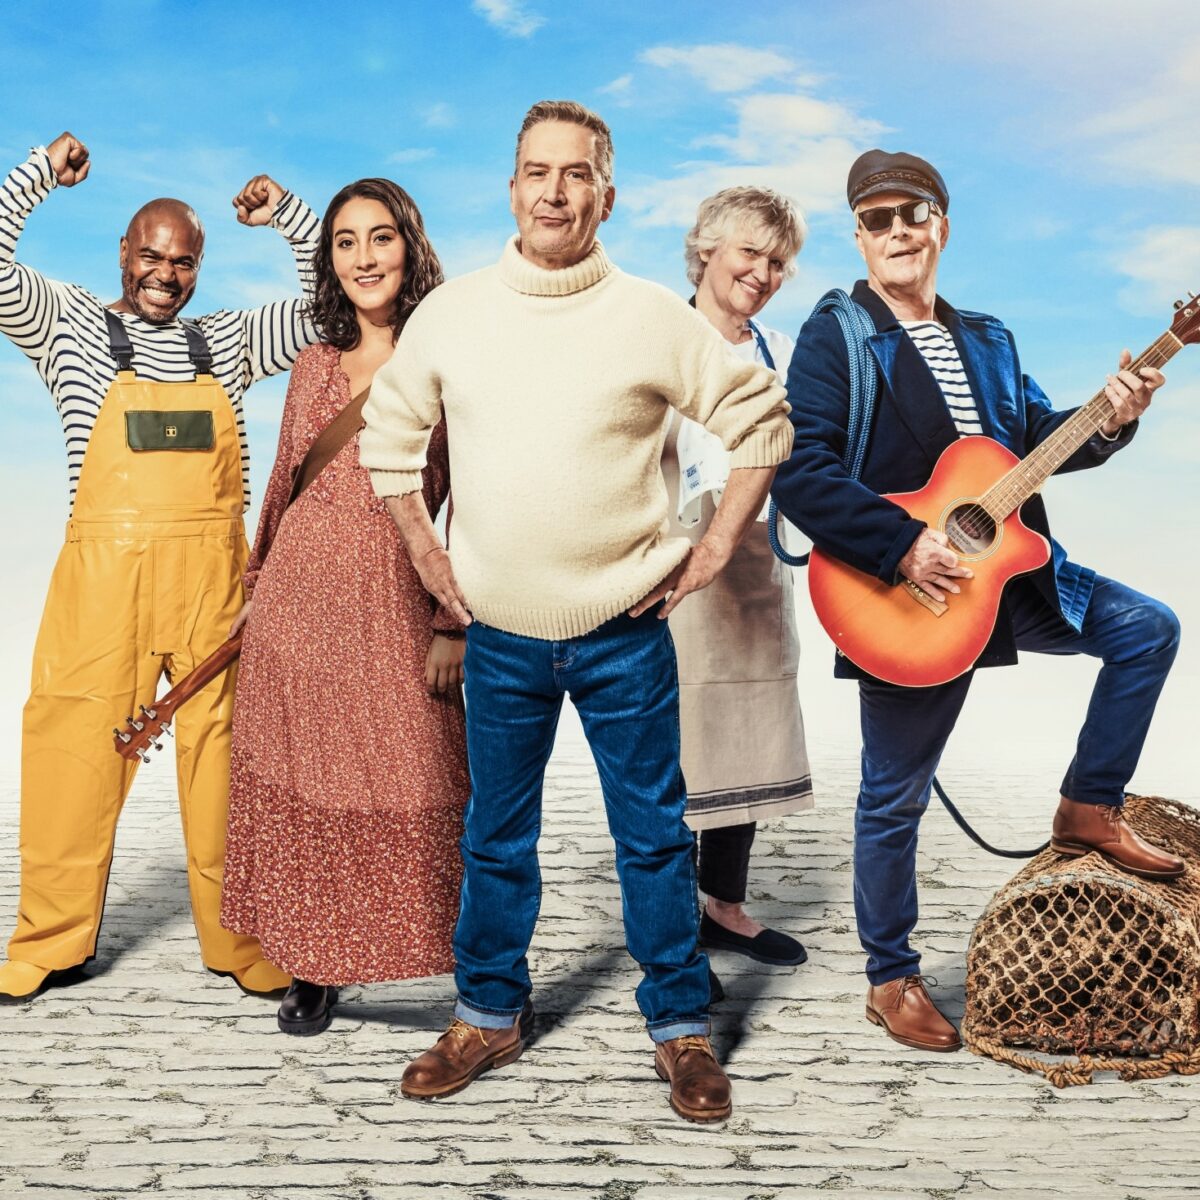 Preview: Fisherman’s Friends: The Musical, Mayflower Theatre, Southampton